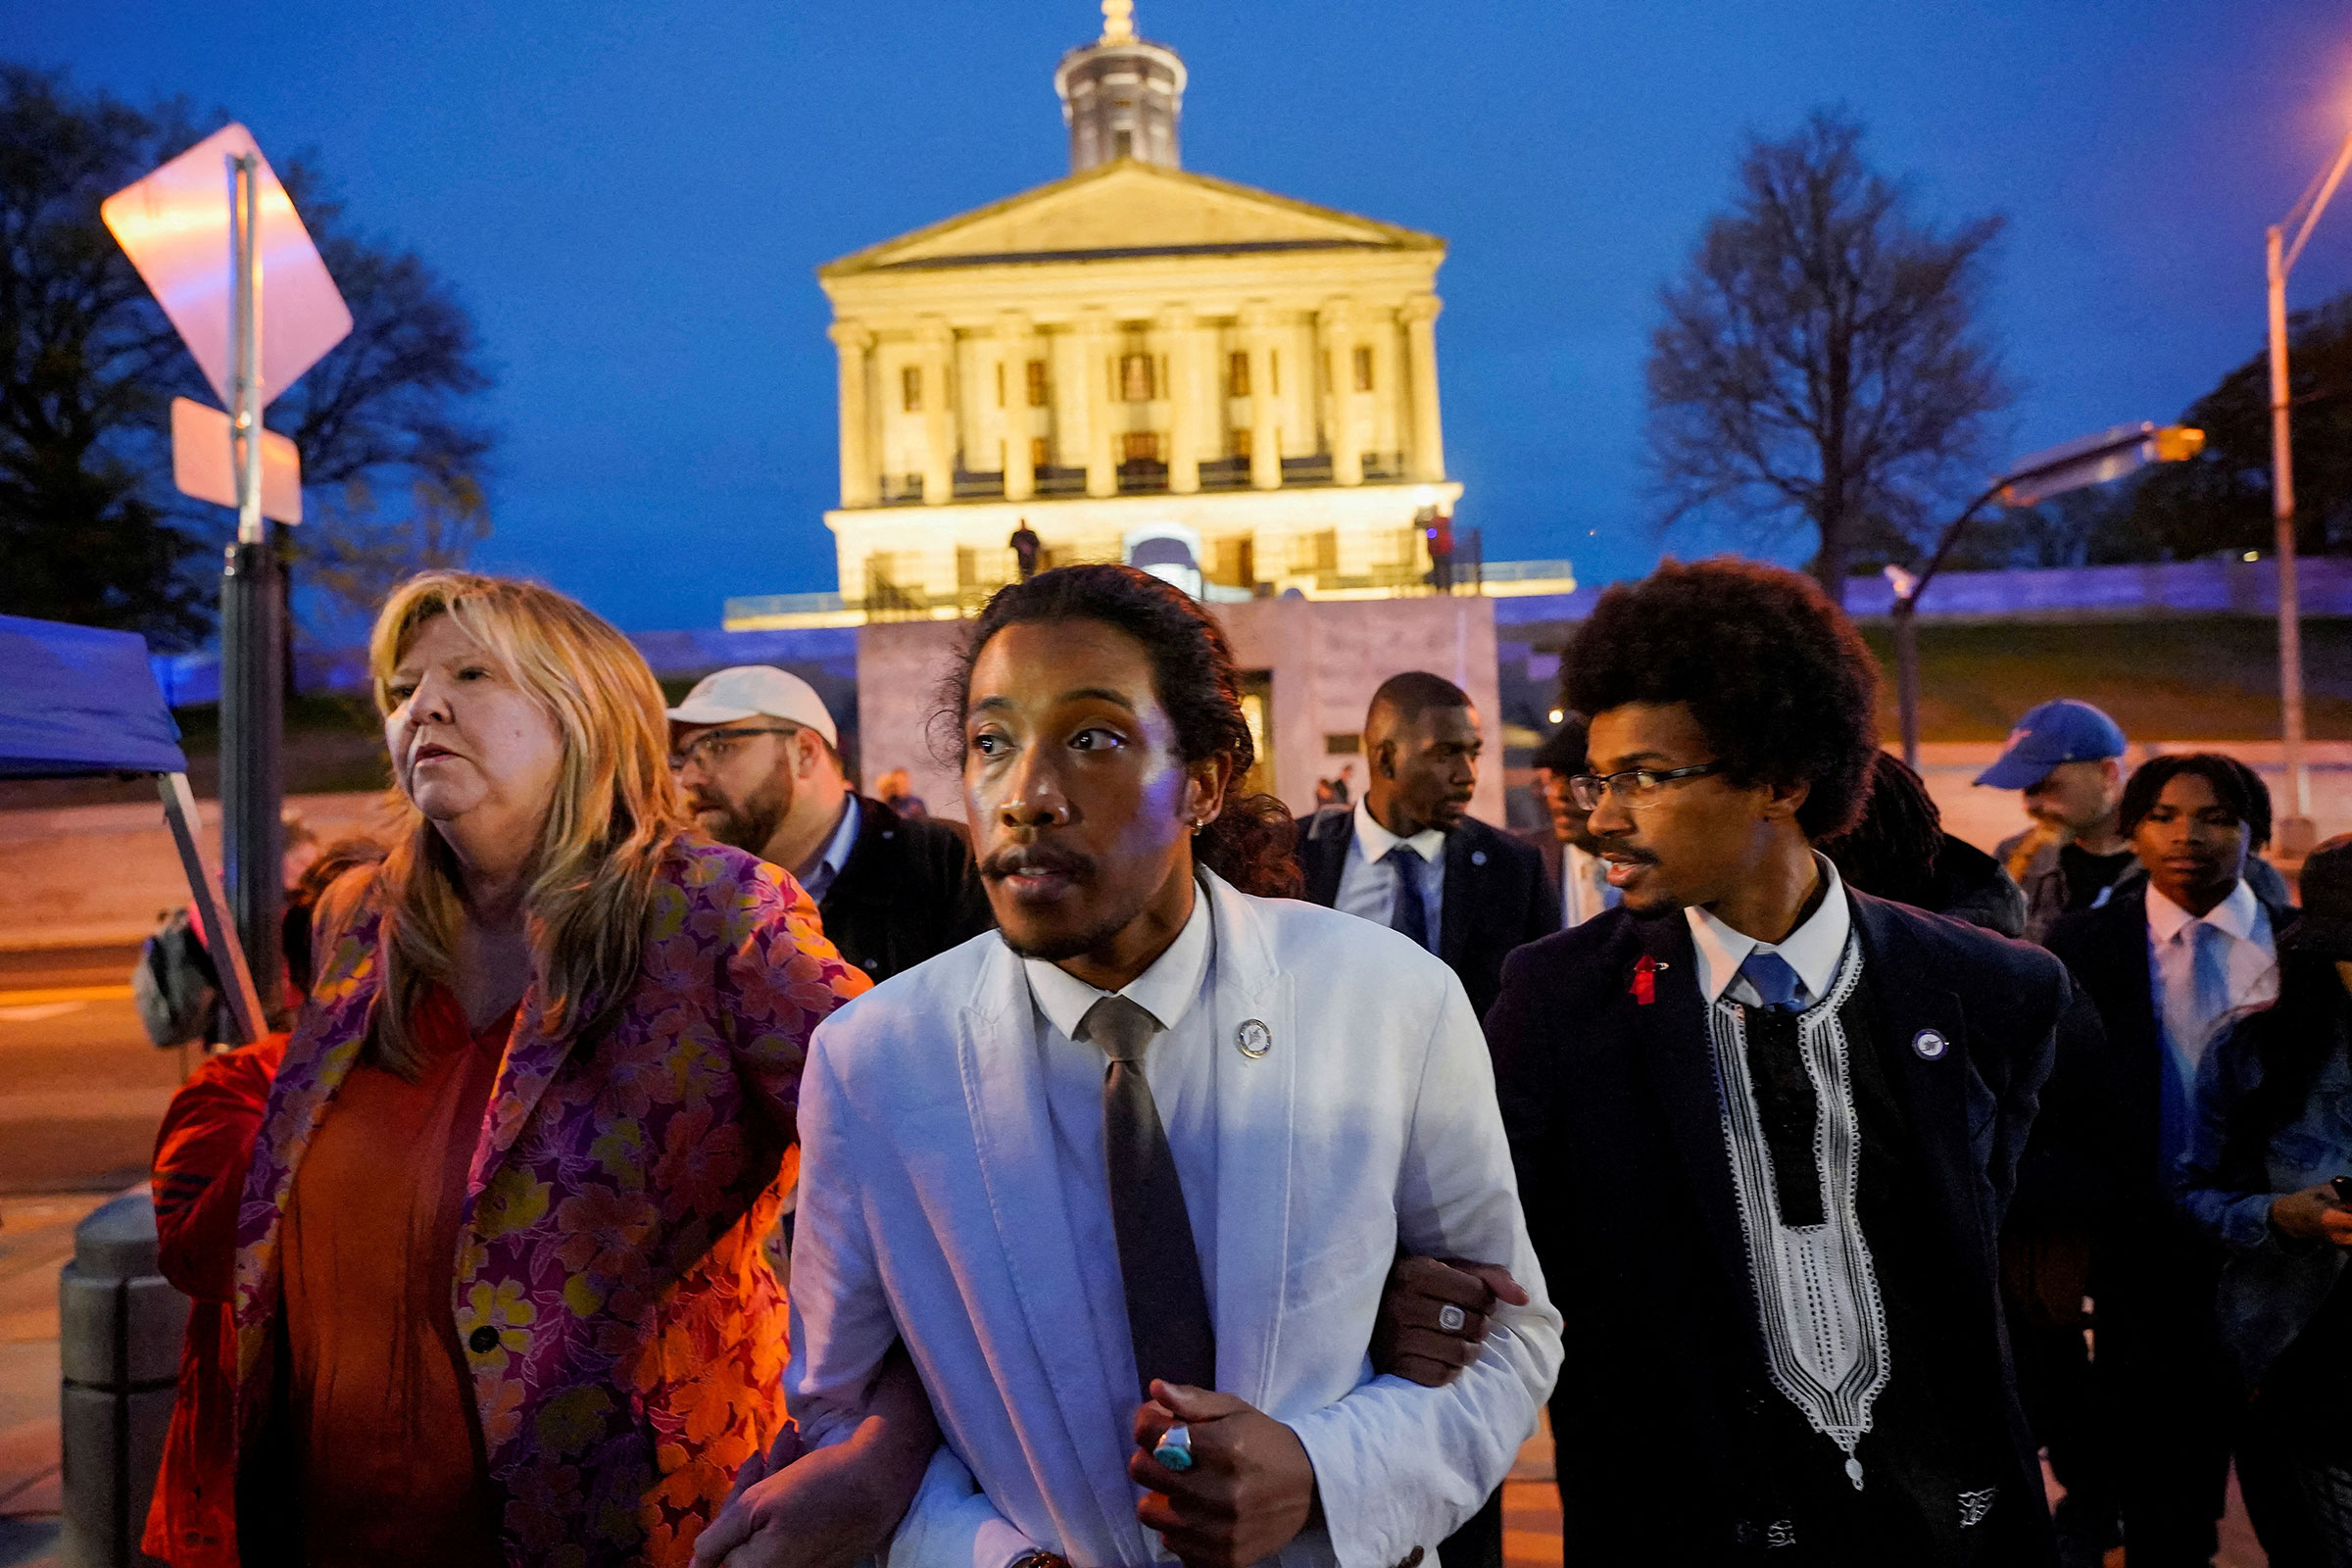 Rep. Gloria Johnson, Rep. Justin Jones, Rep. Justin Pearson leave the Tennessee State Capitol after a vote at the Tennessee House of Representatives to expel two Democratic members for their roles in a gun control demonstration at the statehouse last week, in Nashville, Tenn., on April 6.